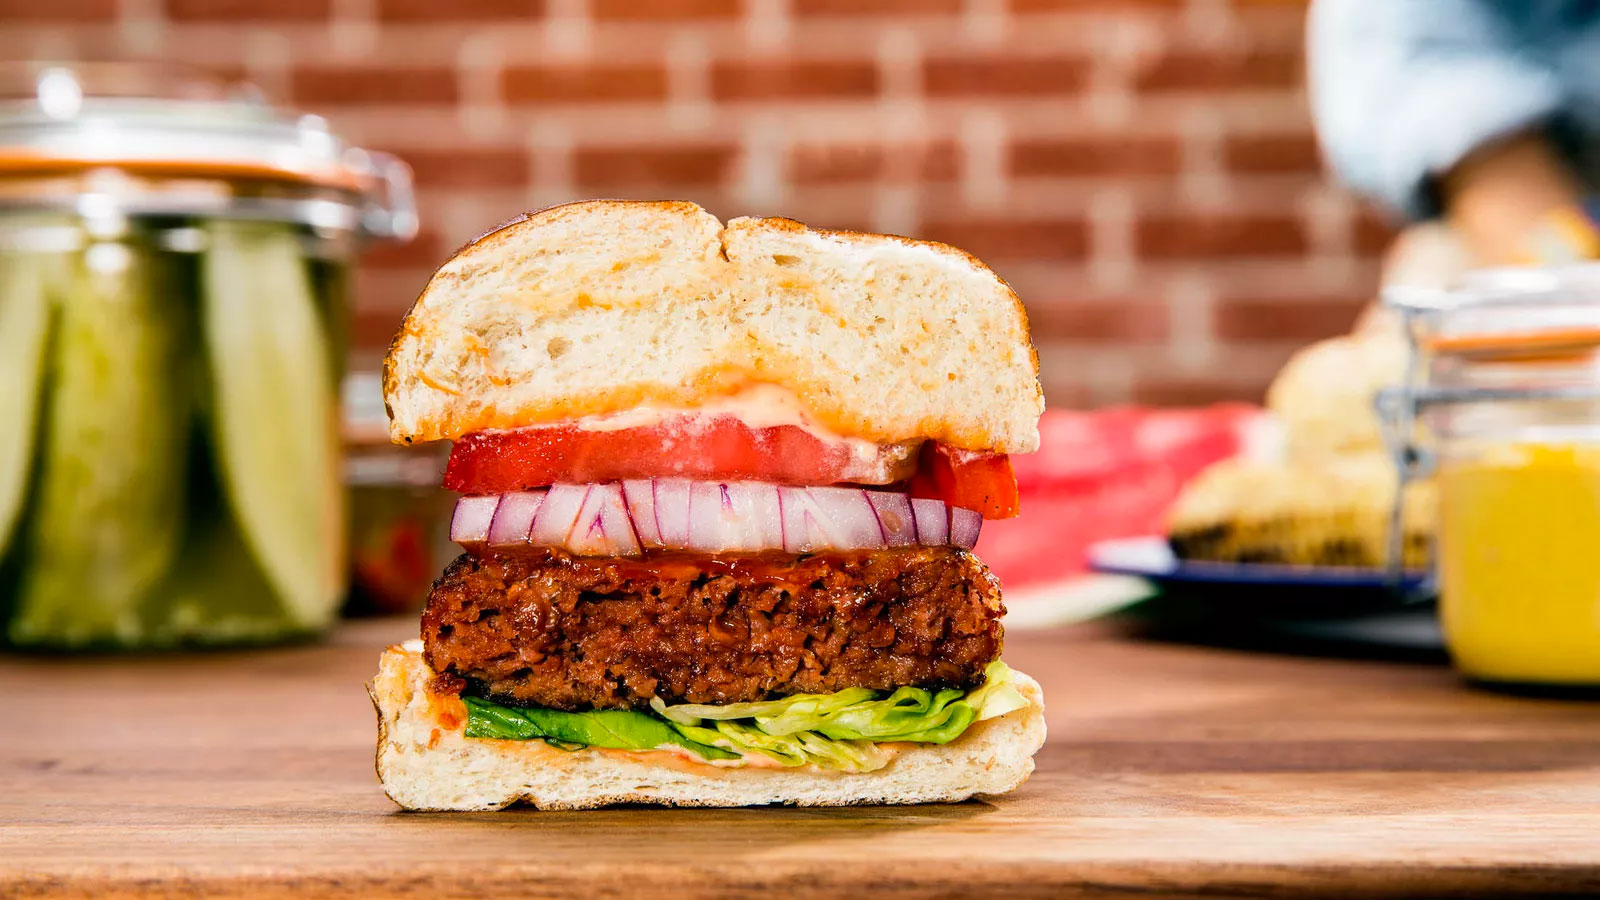 🥬 Is This Vegan or Not? If You Get 12/15 on This Quiz, You’re a Vegan Food Expert Beyond Meat Burger